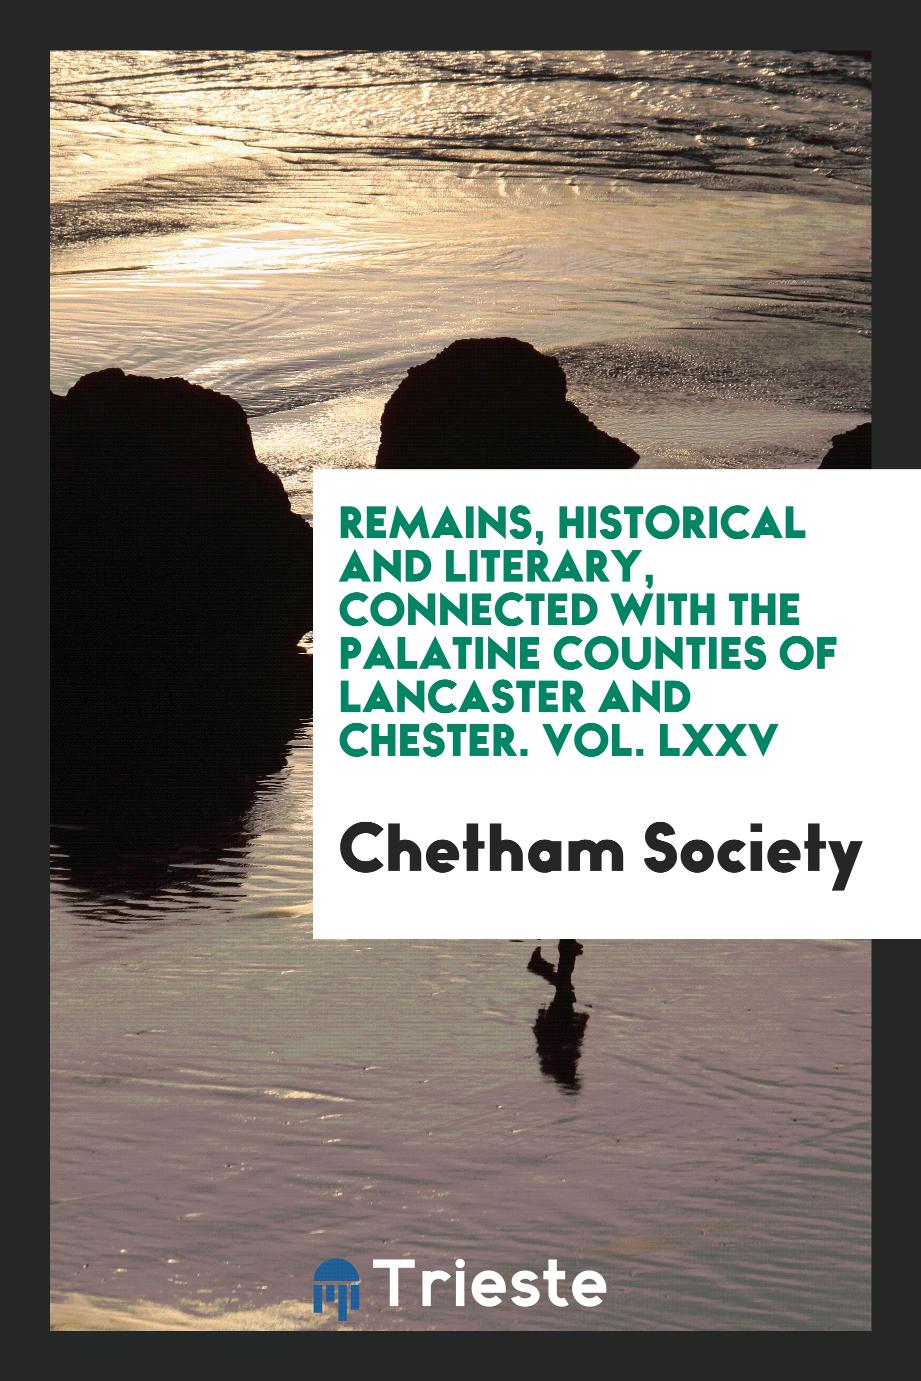 Remains, Historical and Literary, Connected with the Palatine Counties of Lancaster and Chester. Vol. LXXV